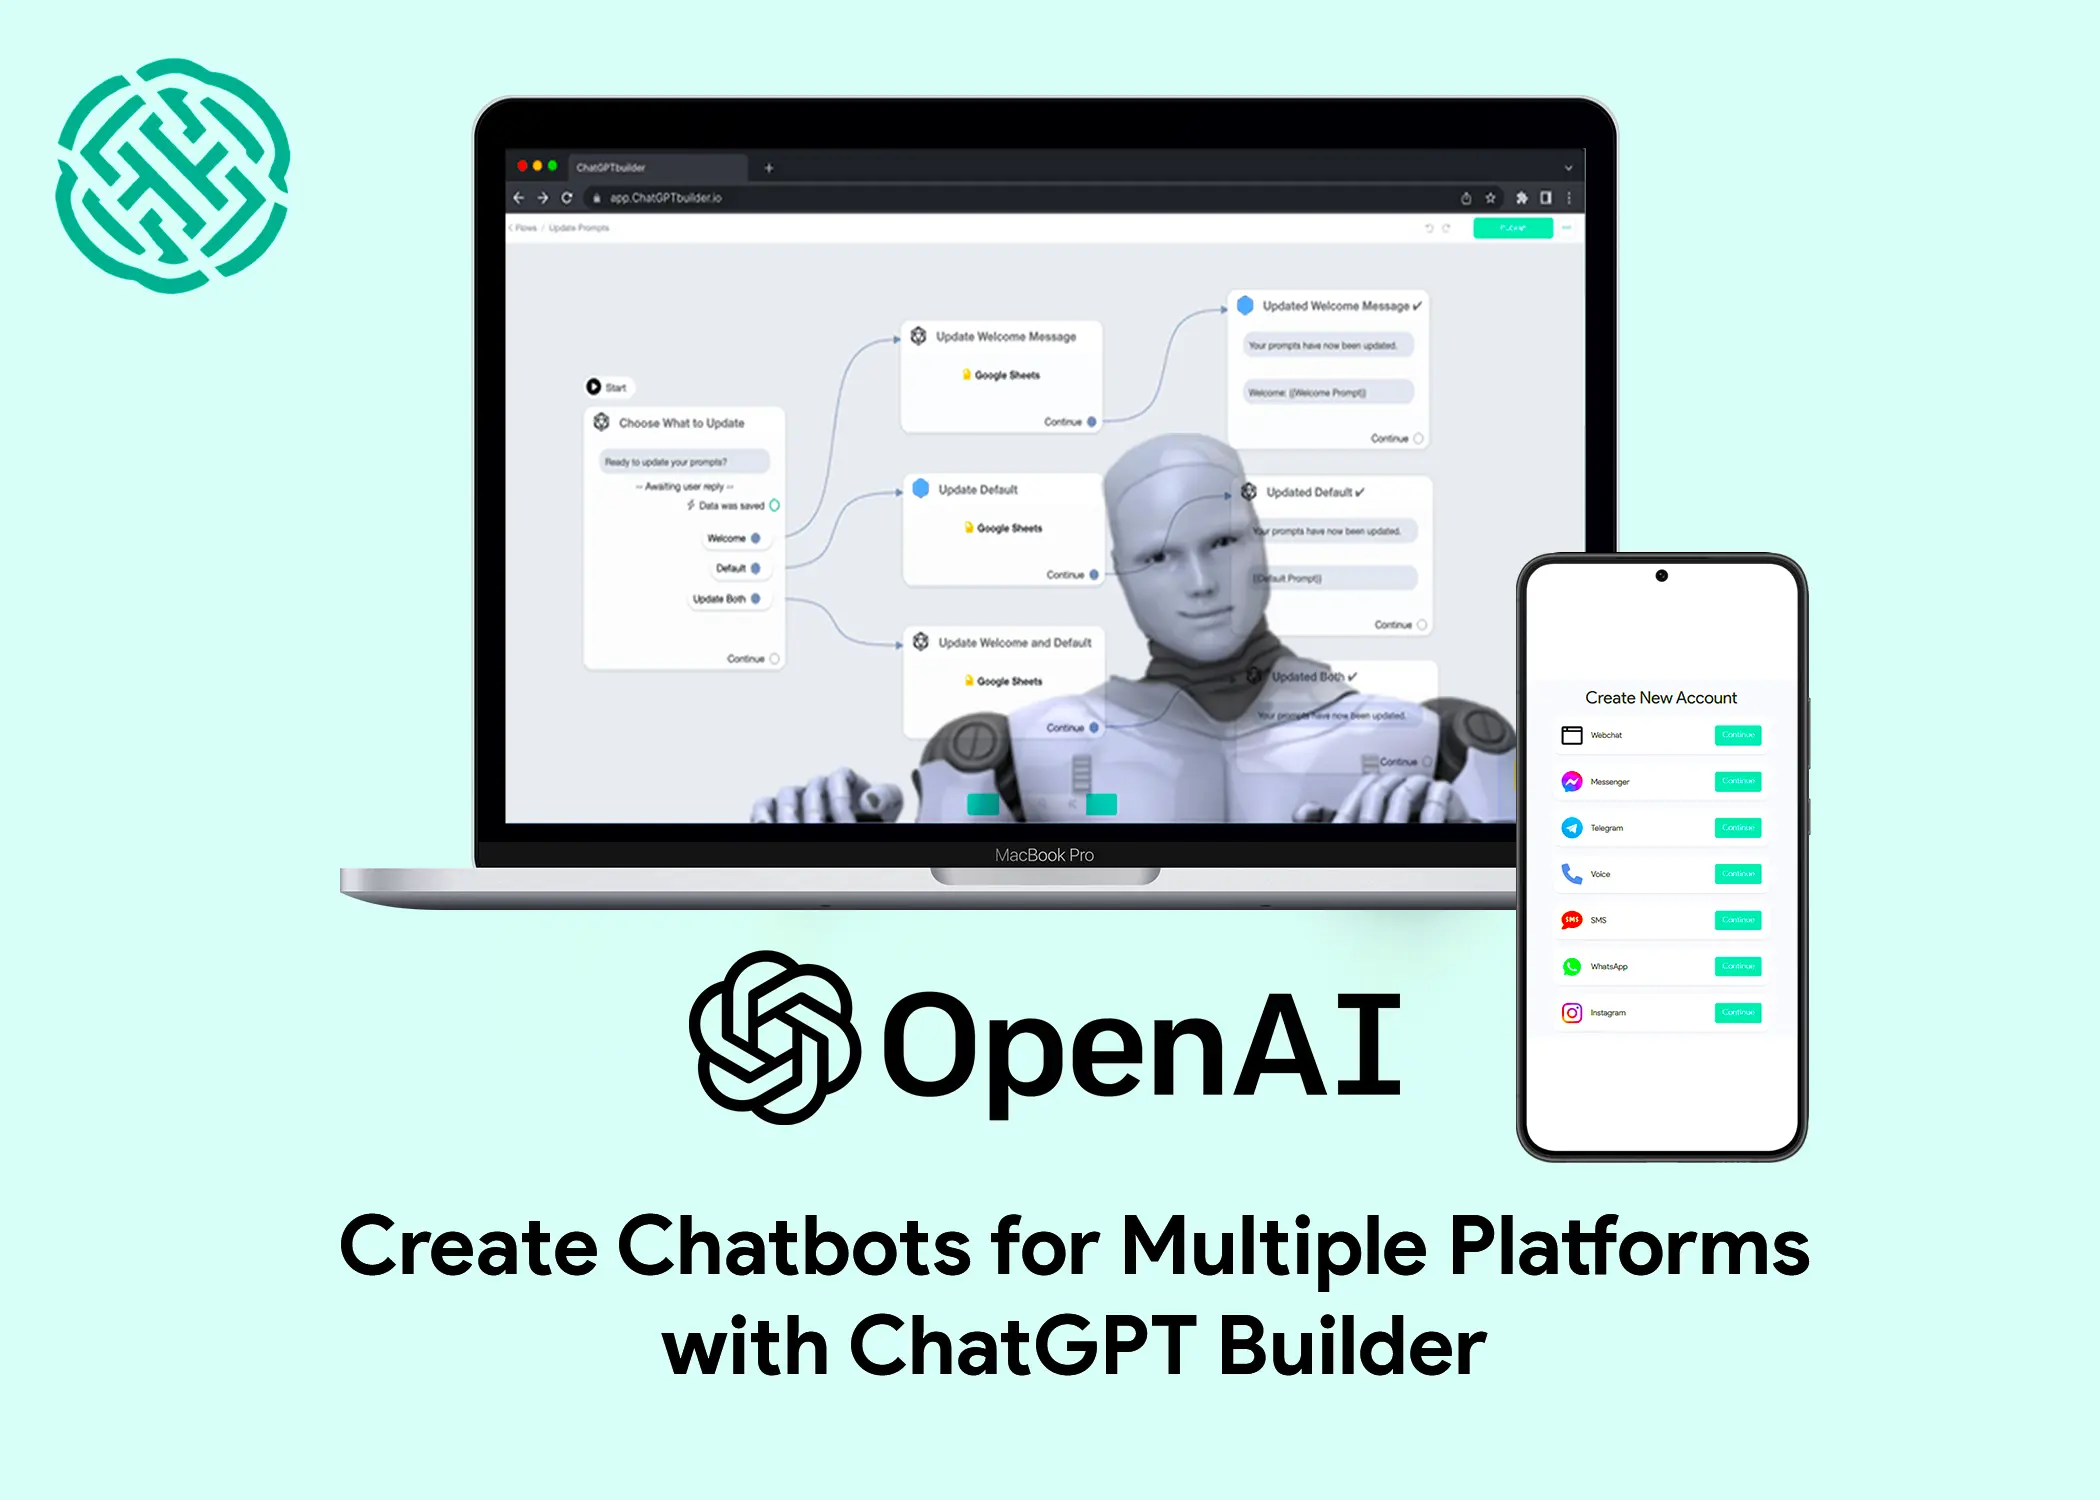 Create Chatbots for Multiple Platforms with ChatGPT Builder